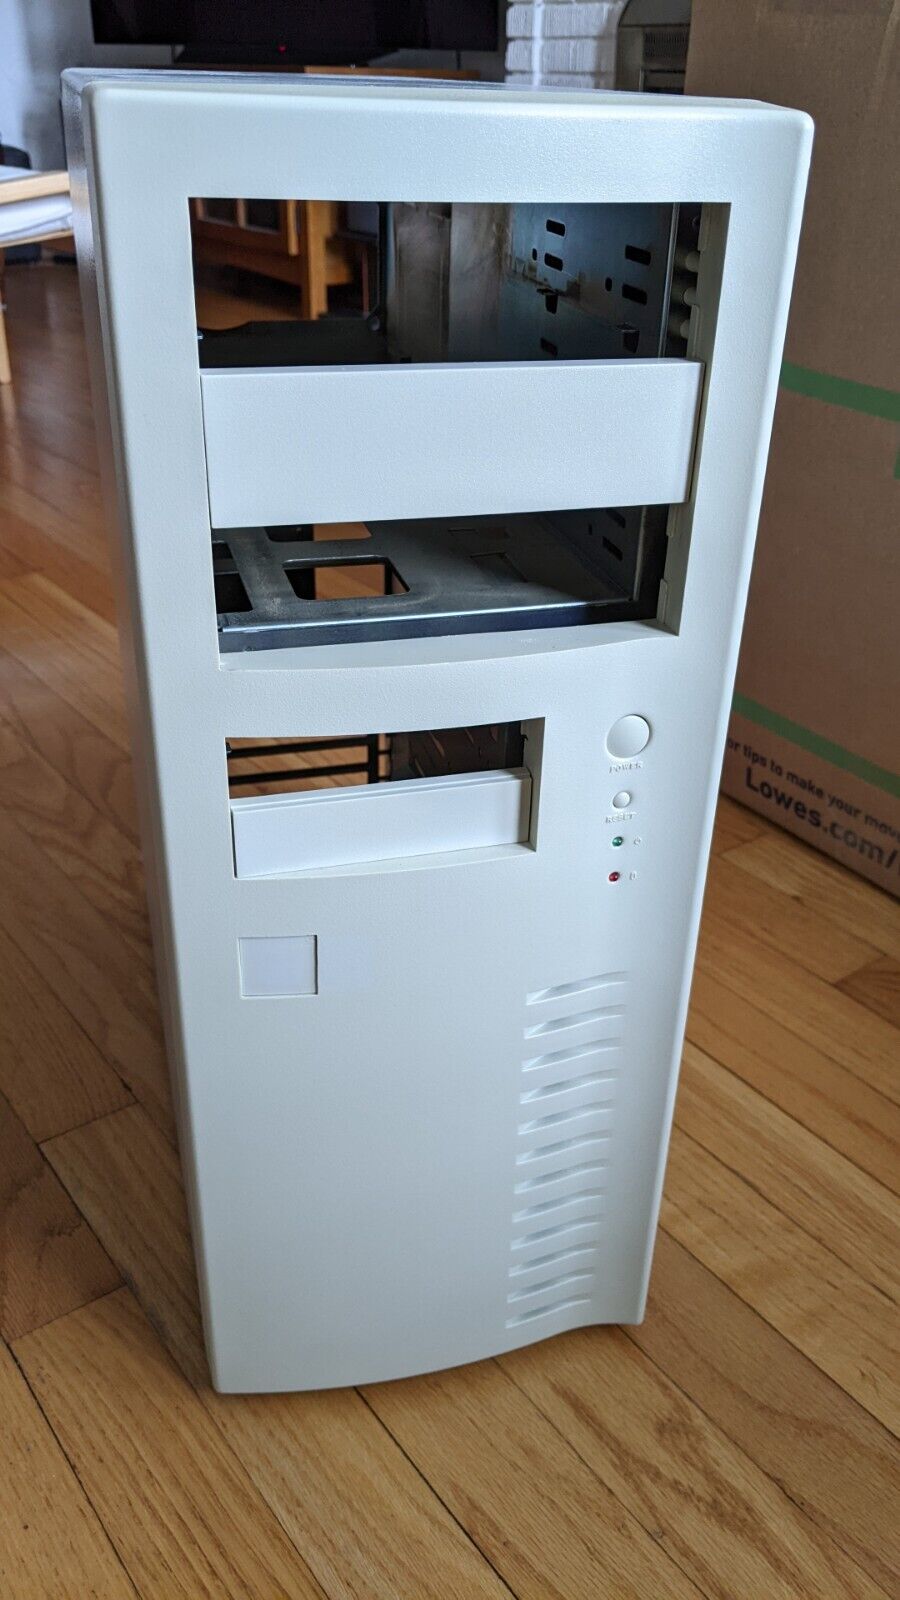 Vintage Beige Mid-Tower ATX Computer Case for Retro PC